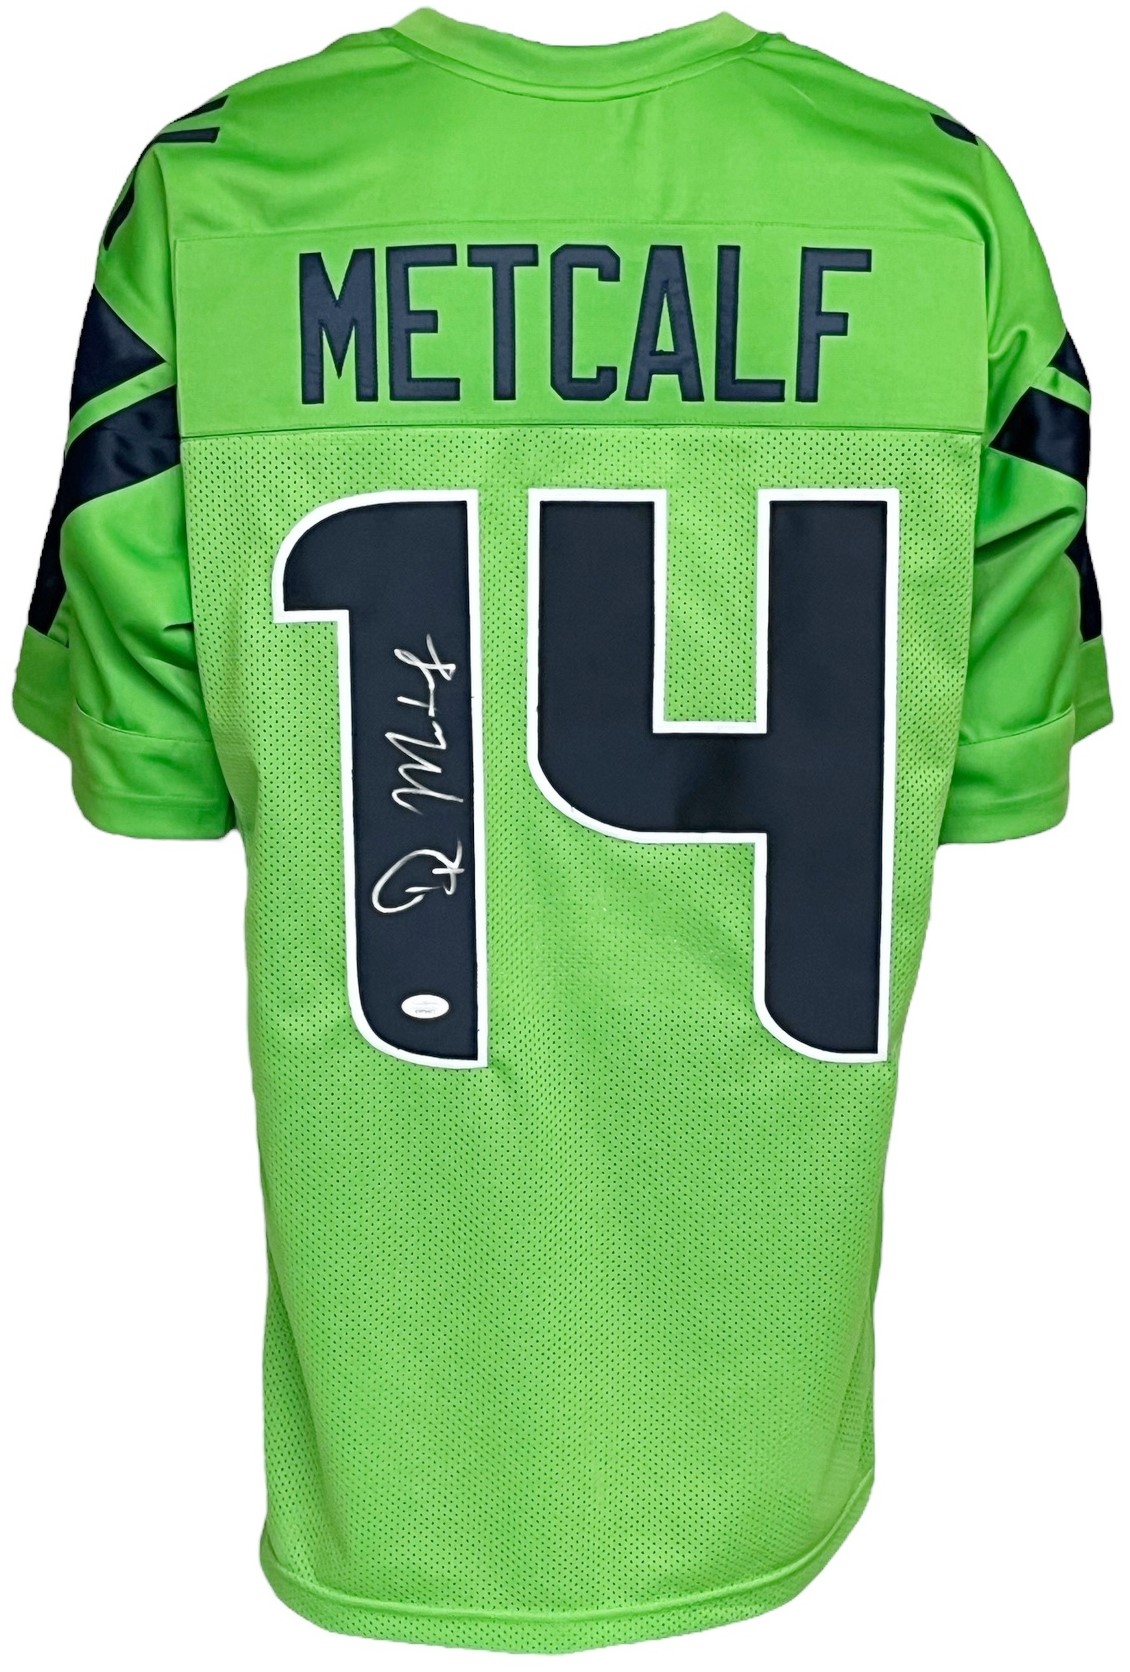 Seattle Seahawks D.K. Metcalf Autographed Pro Style Green Jersey JSA  Authenticated - Tennzone Sports Memorabilia